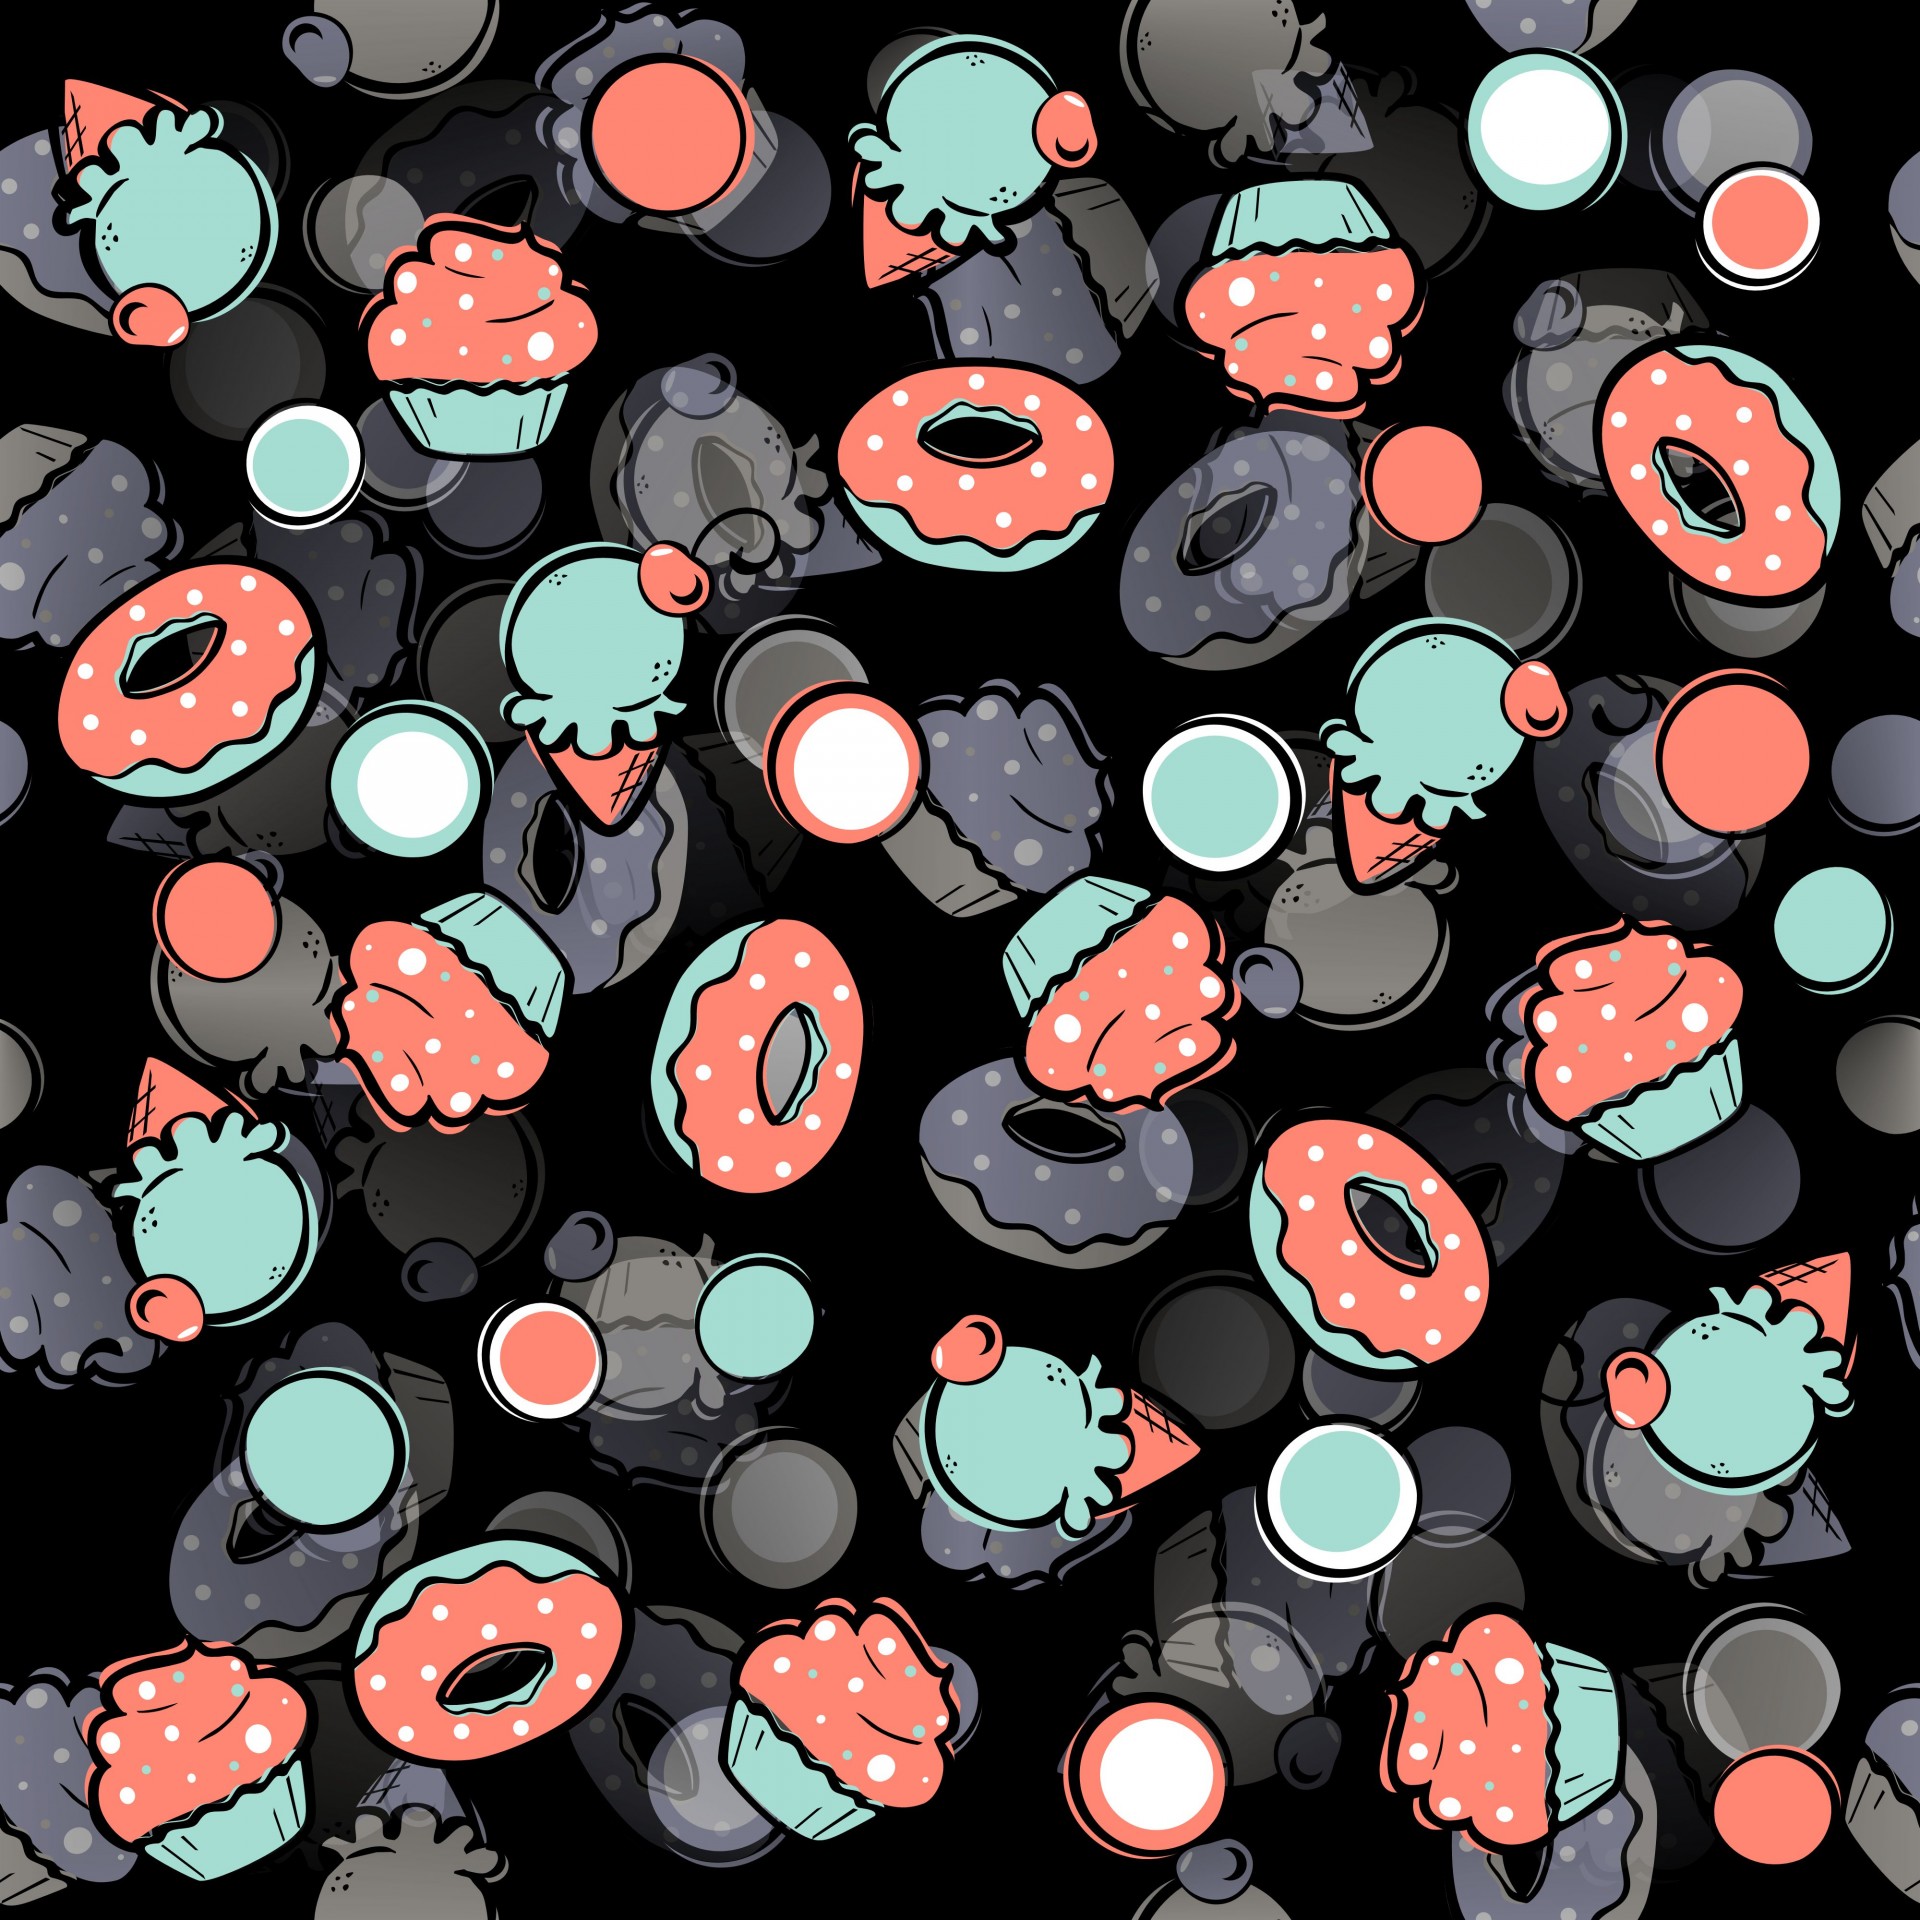 Cupcakes, donuts, and ice cream cones in a seamless repeating image for backgrounds and other large spaces